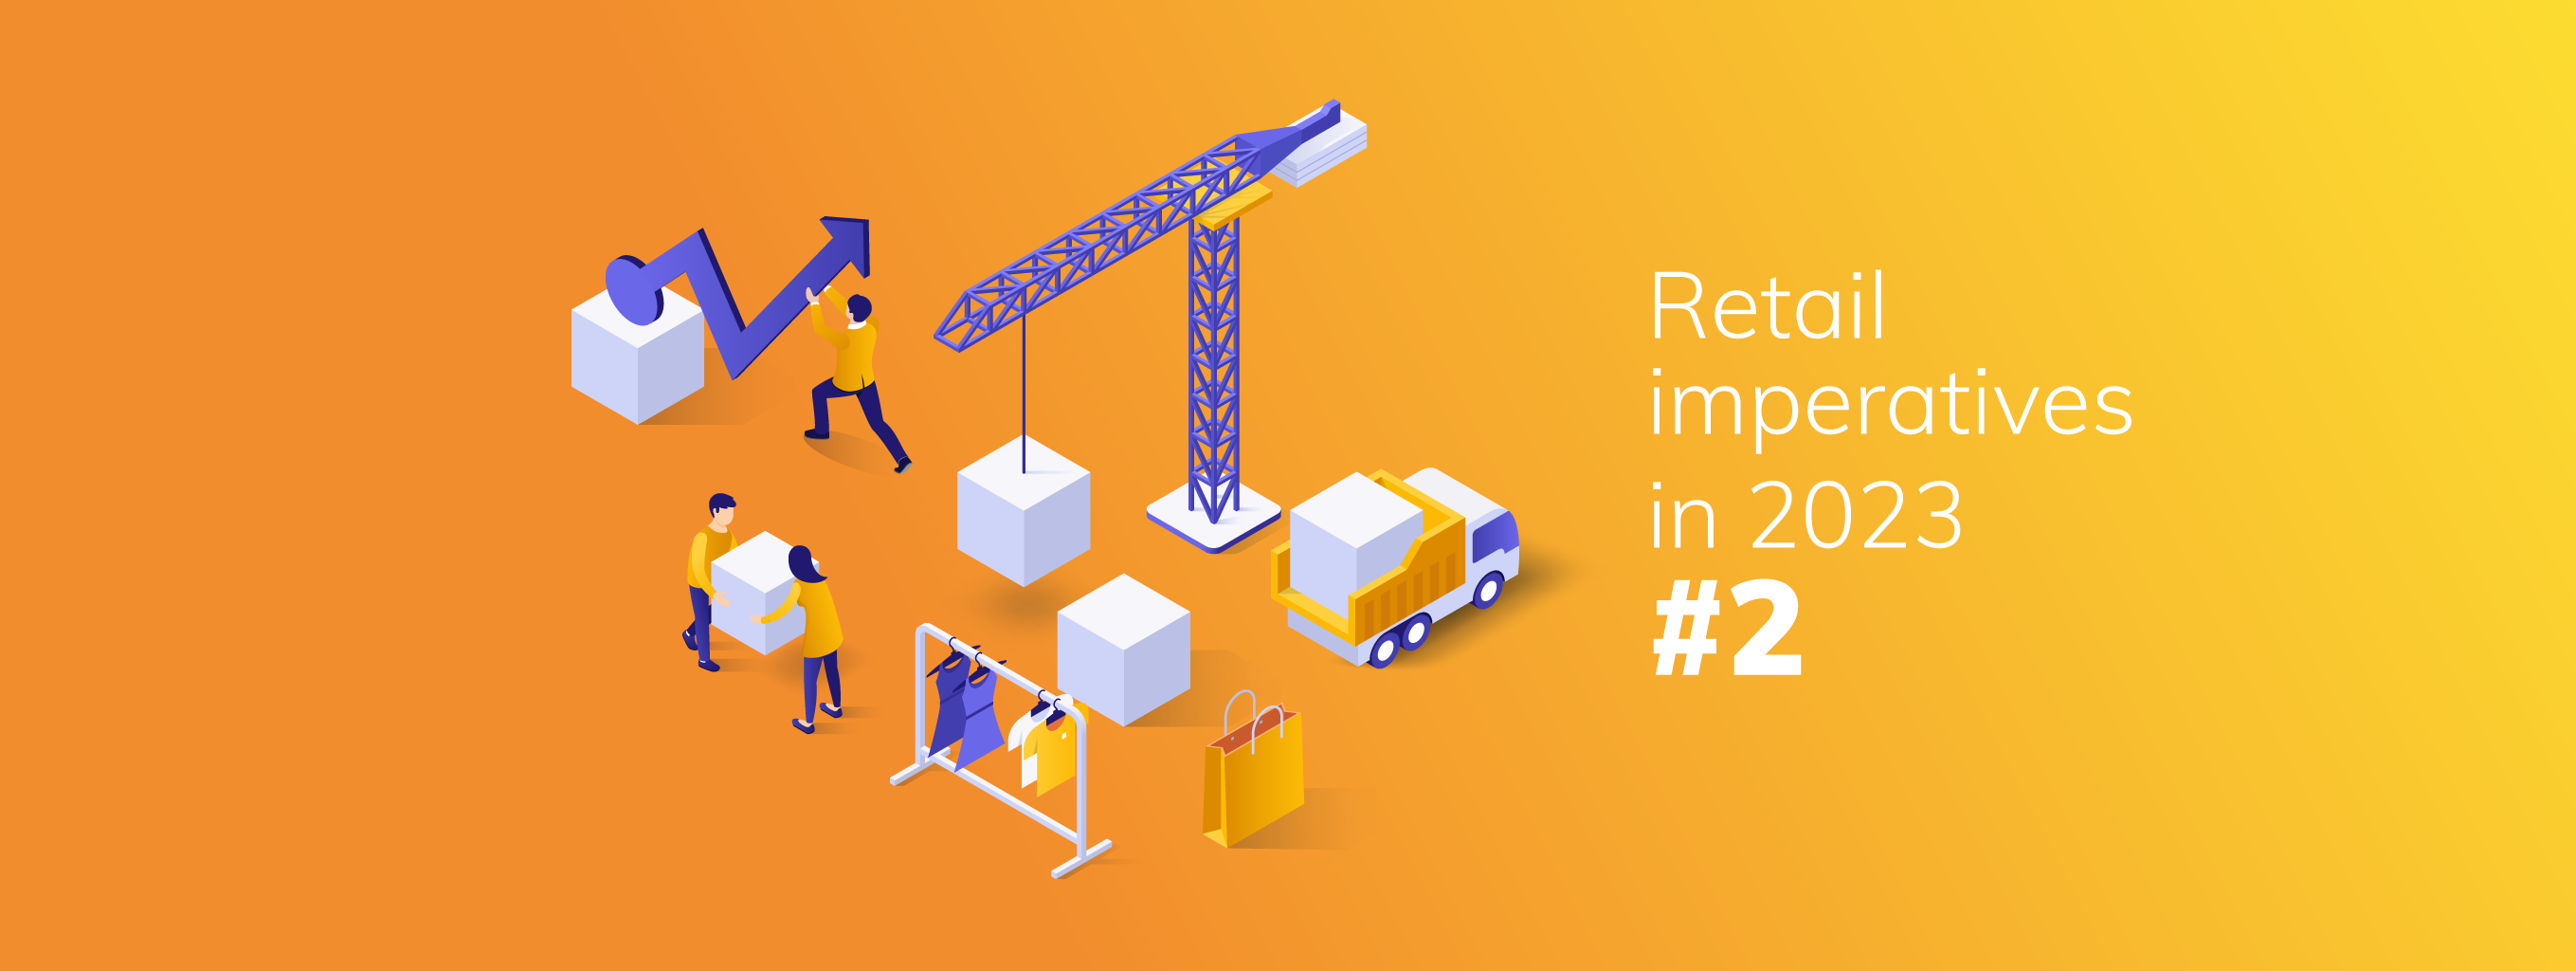 Retail imperatives in 2023 #2: Building resilience